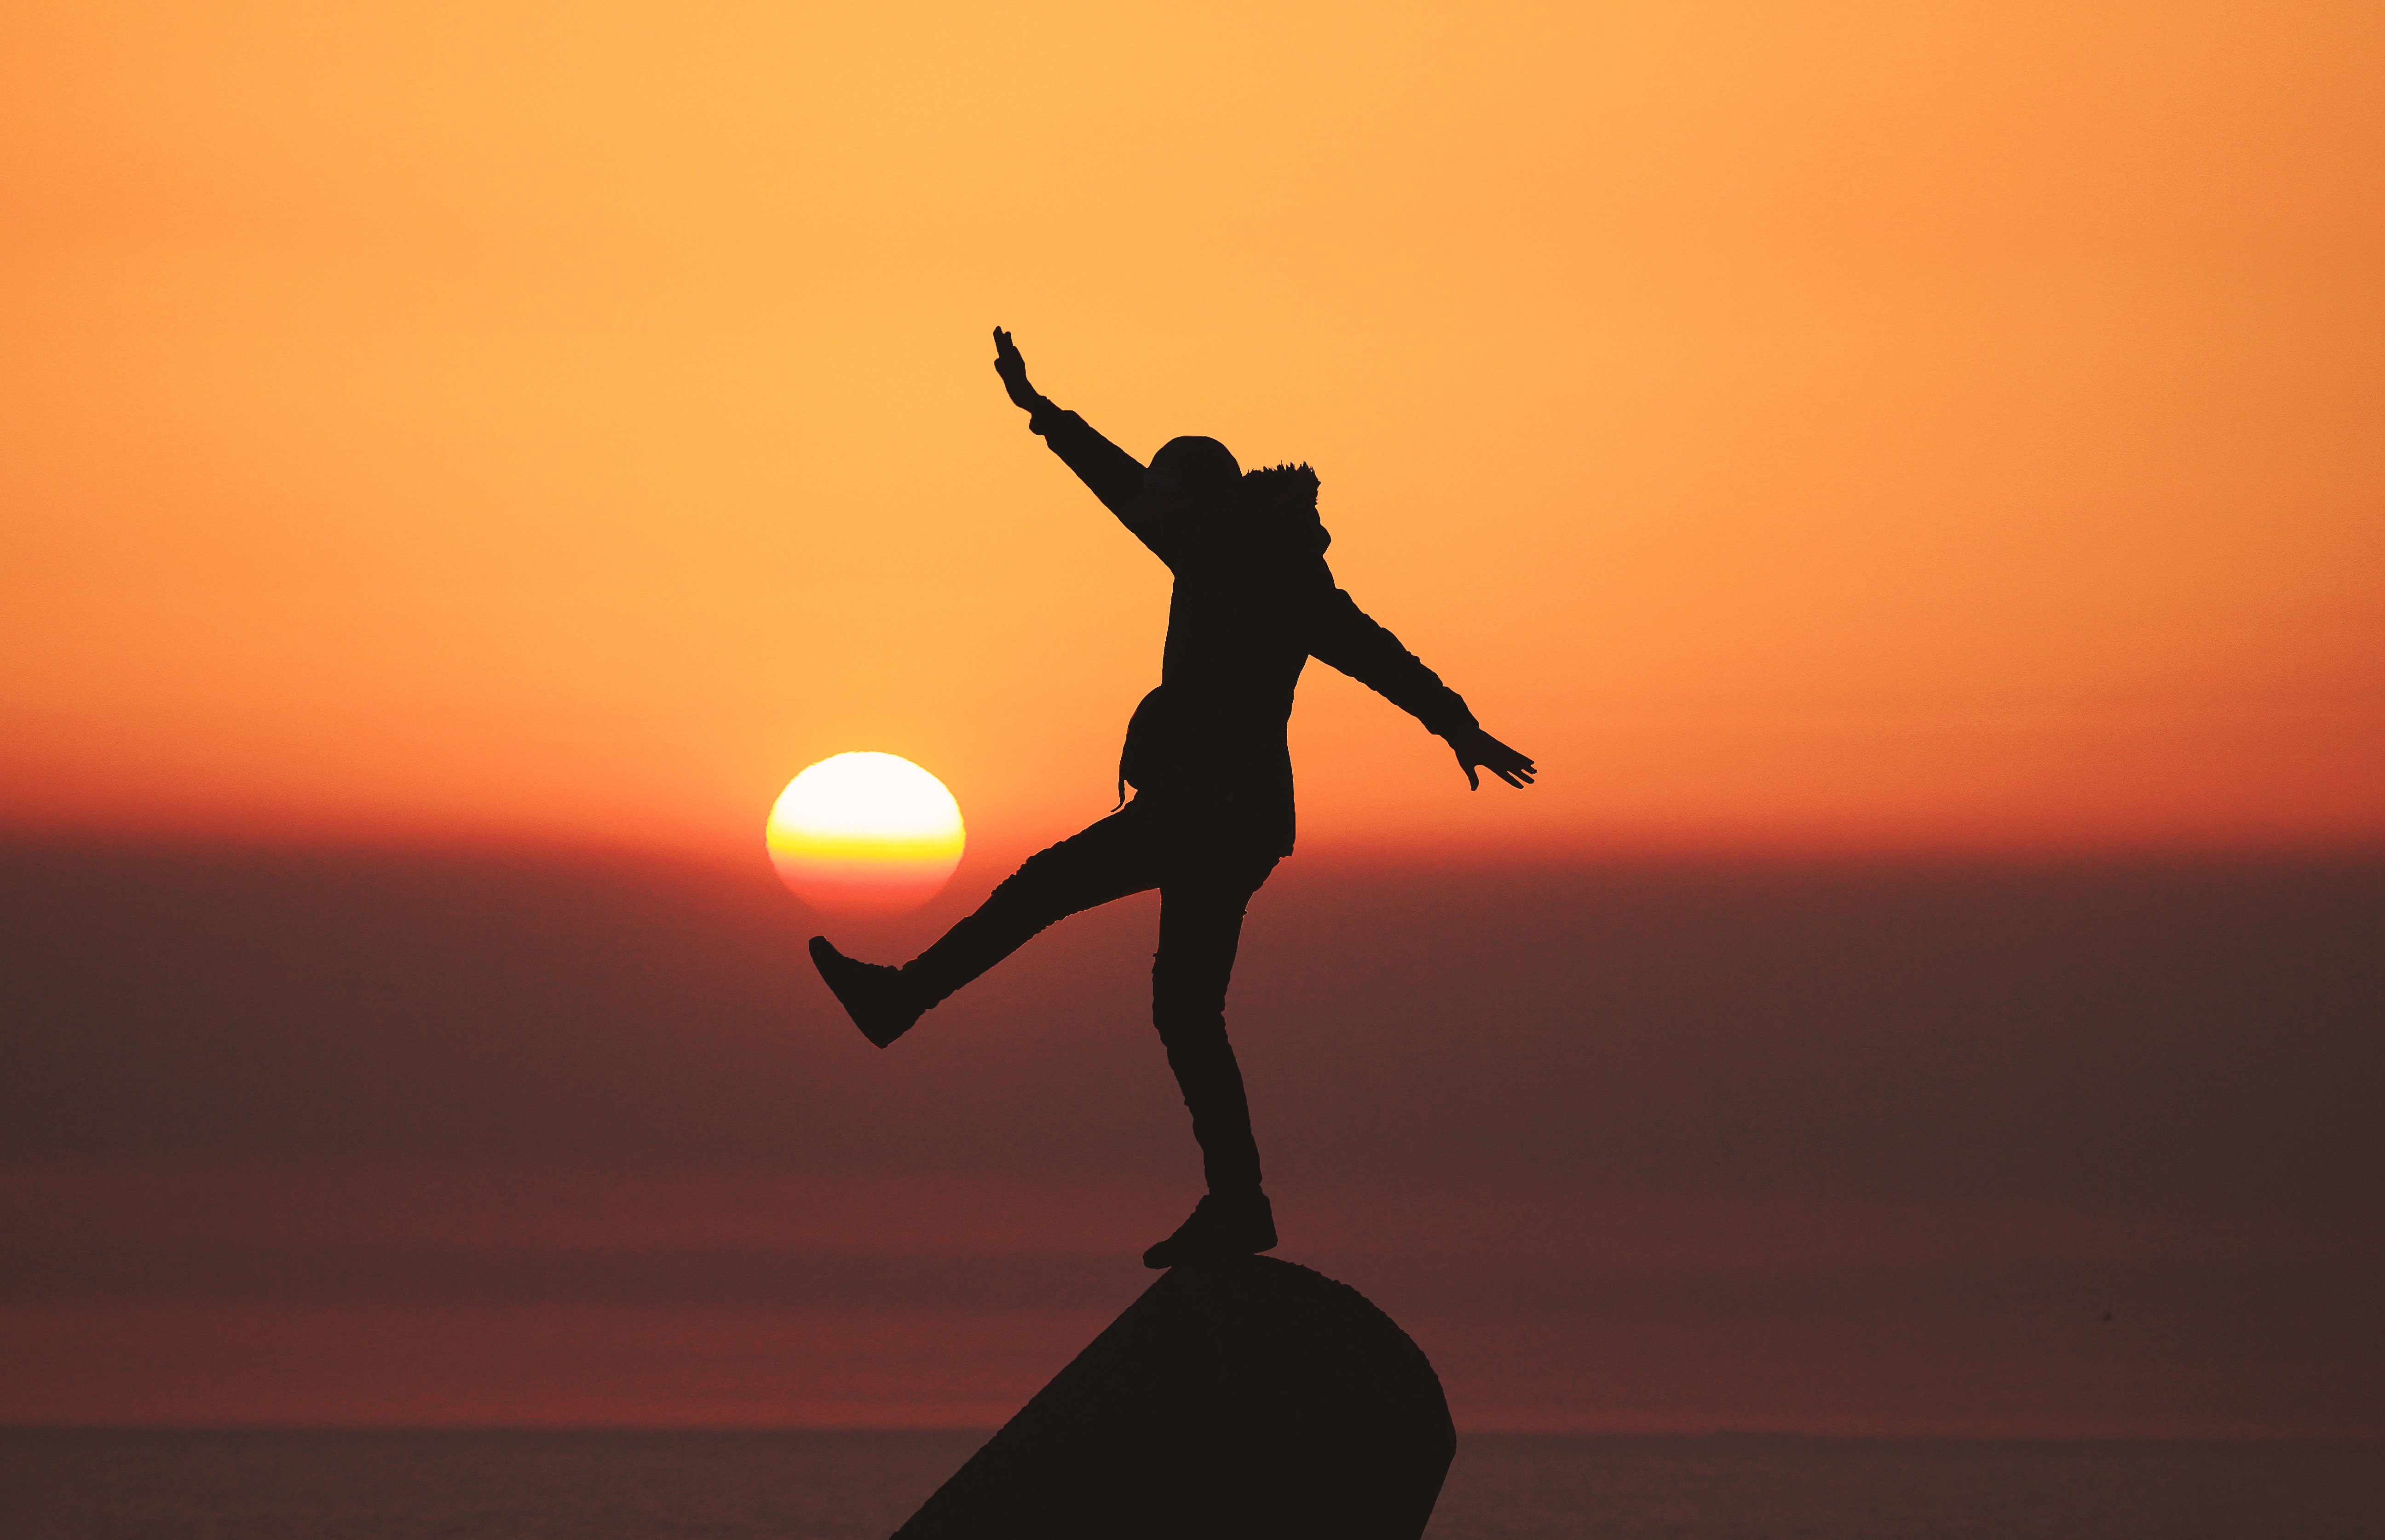 A man is balancing on a rock in front of a sunset